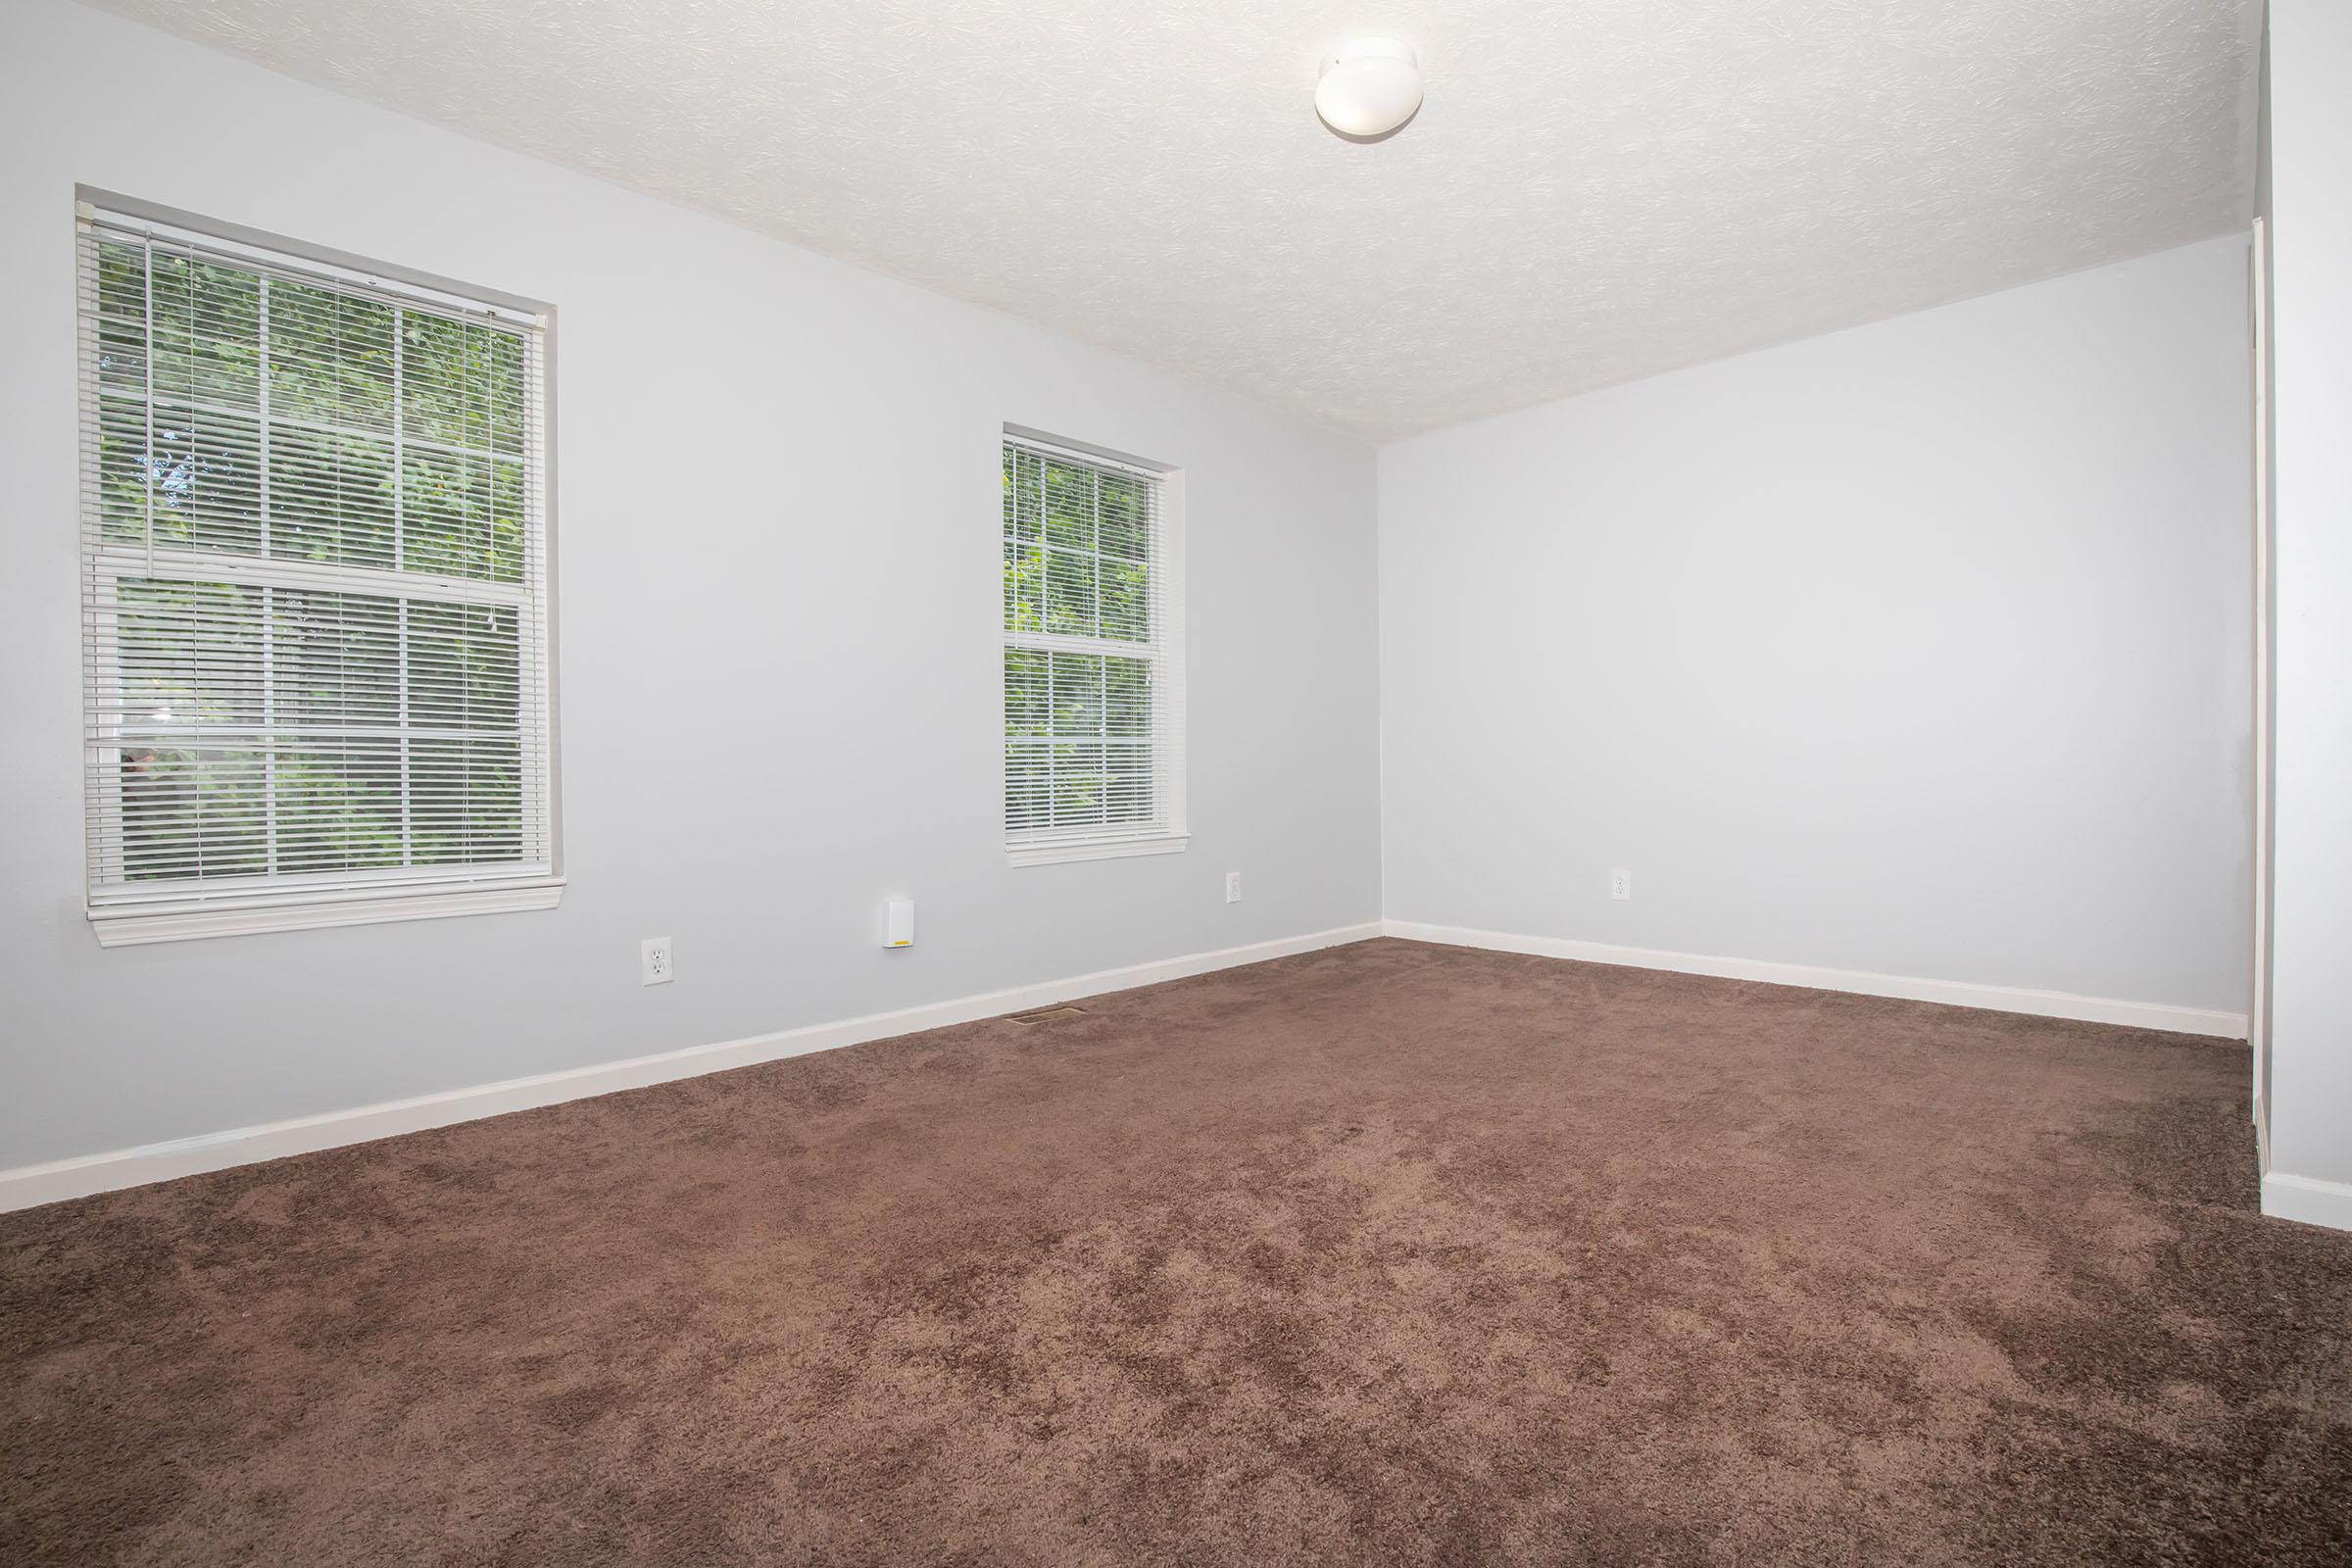 APARTMENTS FOR RENT IN INDIANA